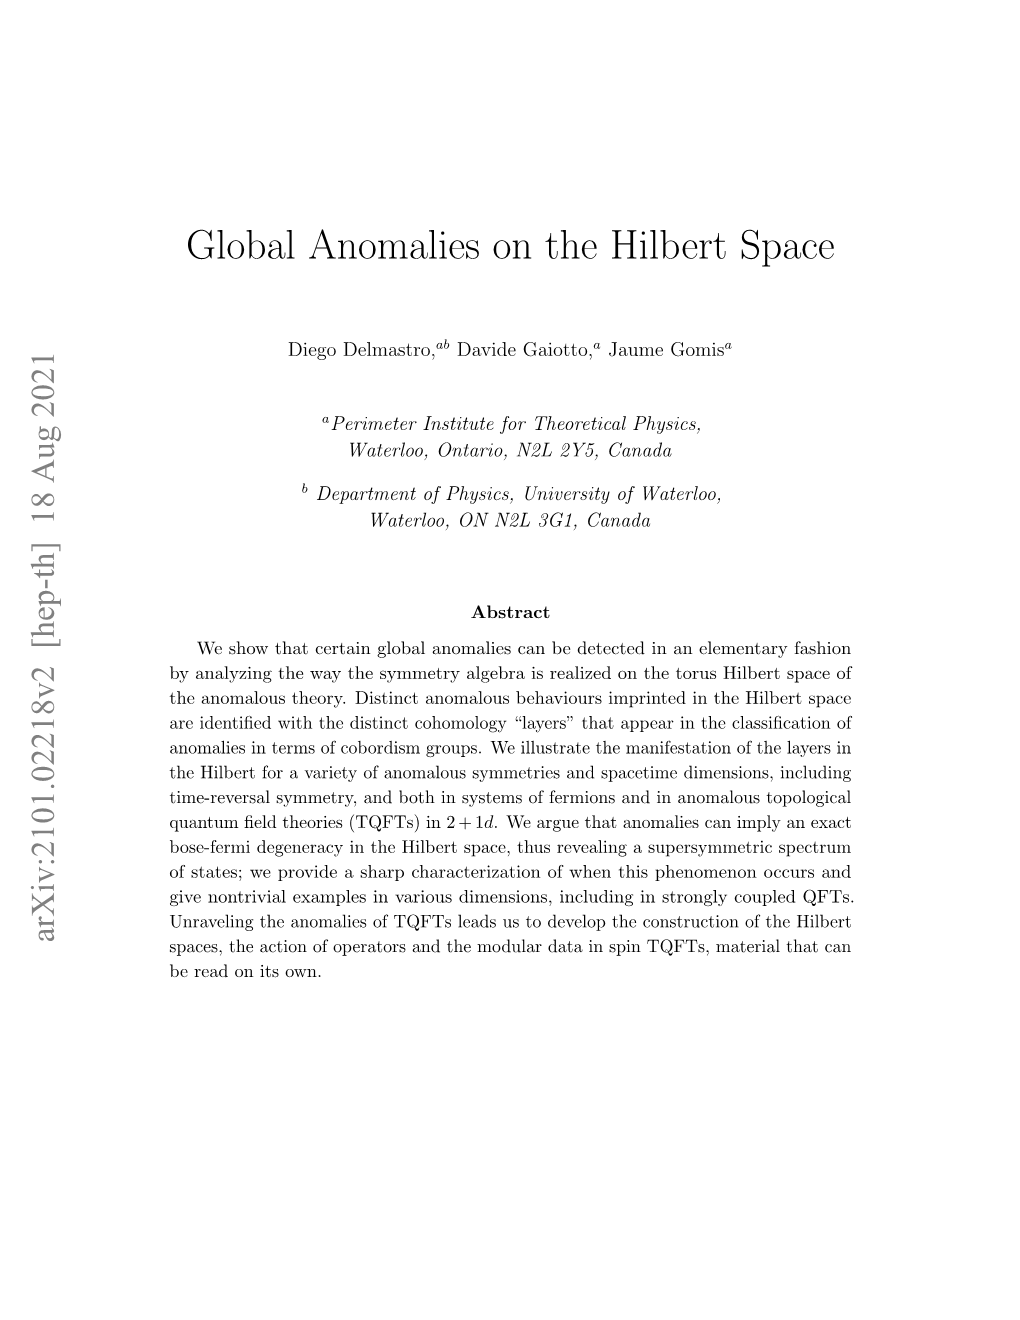 Global Anomalies on the Hilbert Space